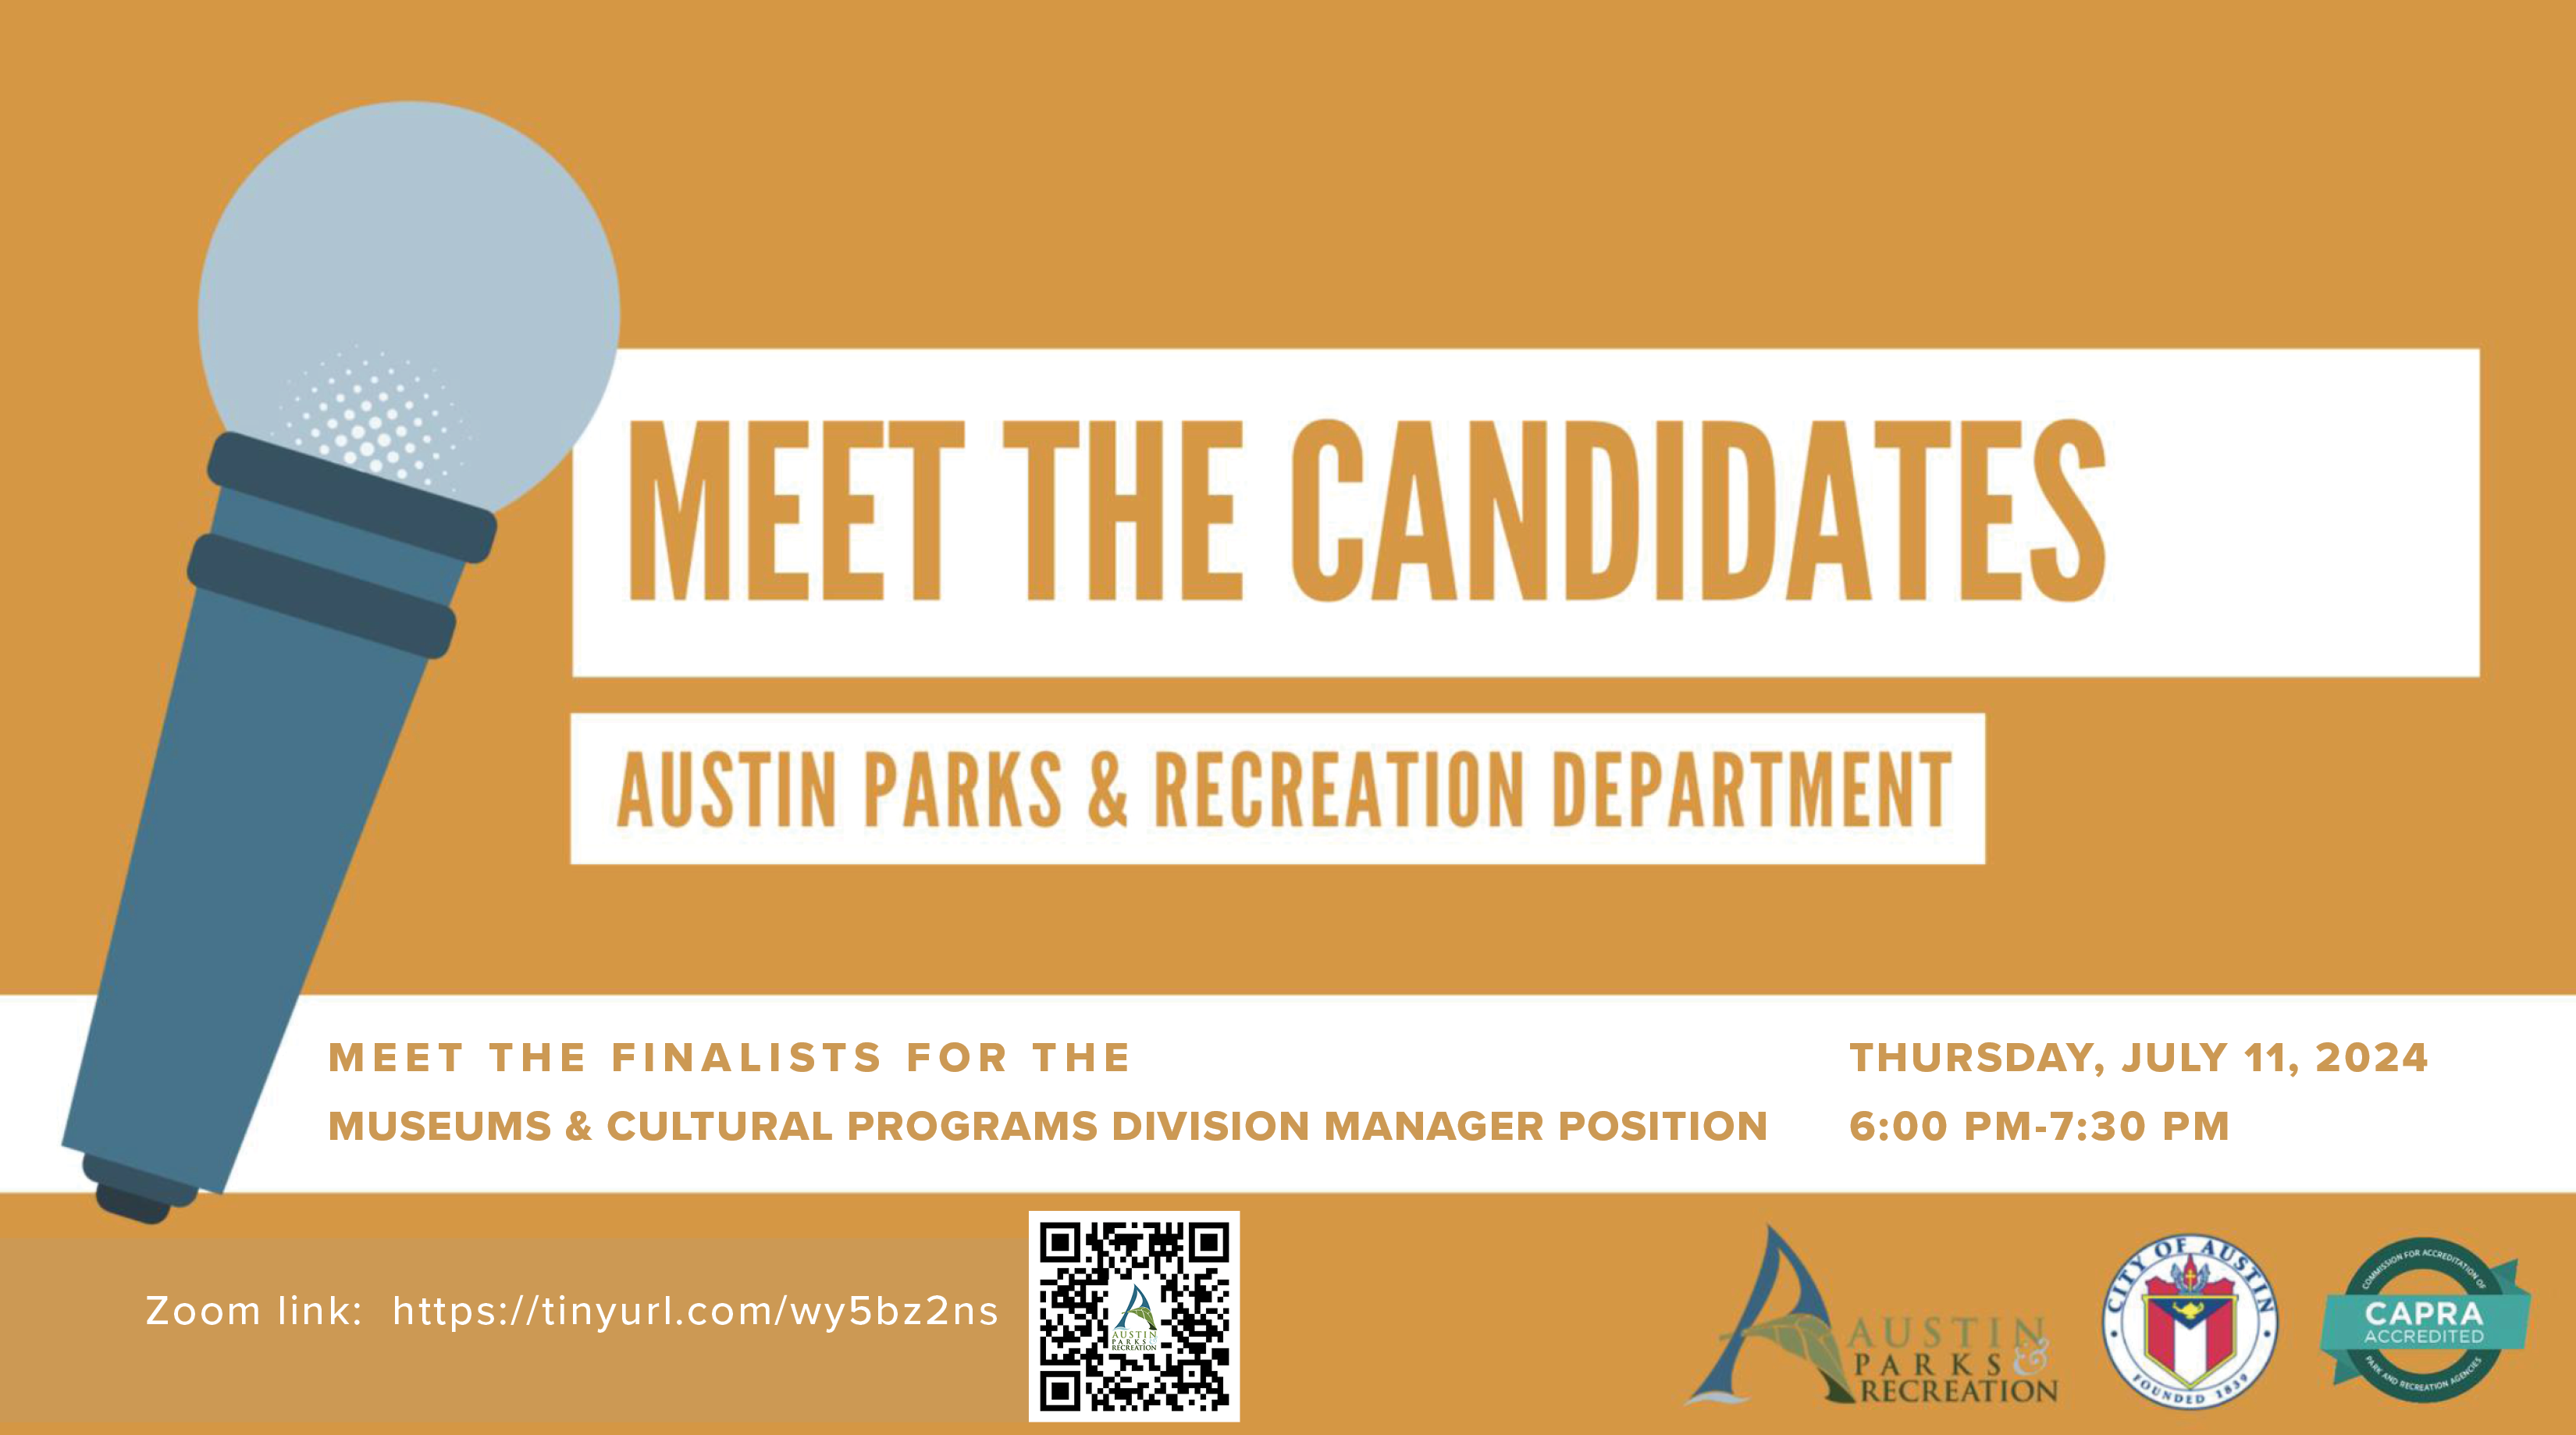 Meet the Finalists for the Museums and Cultural Programs Division Manager Position at the Austin Parks and Recreation Department